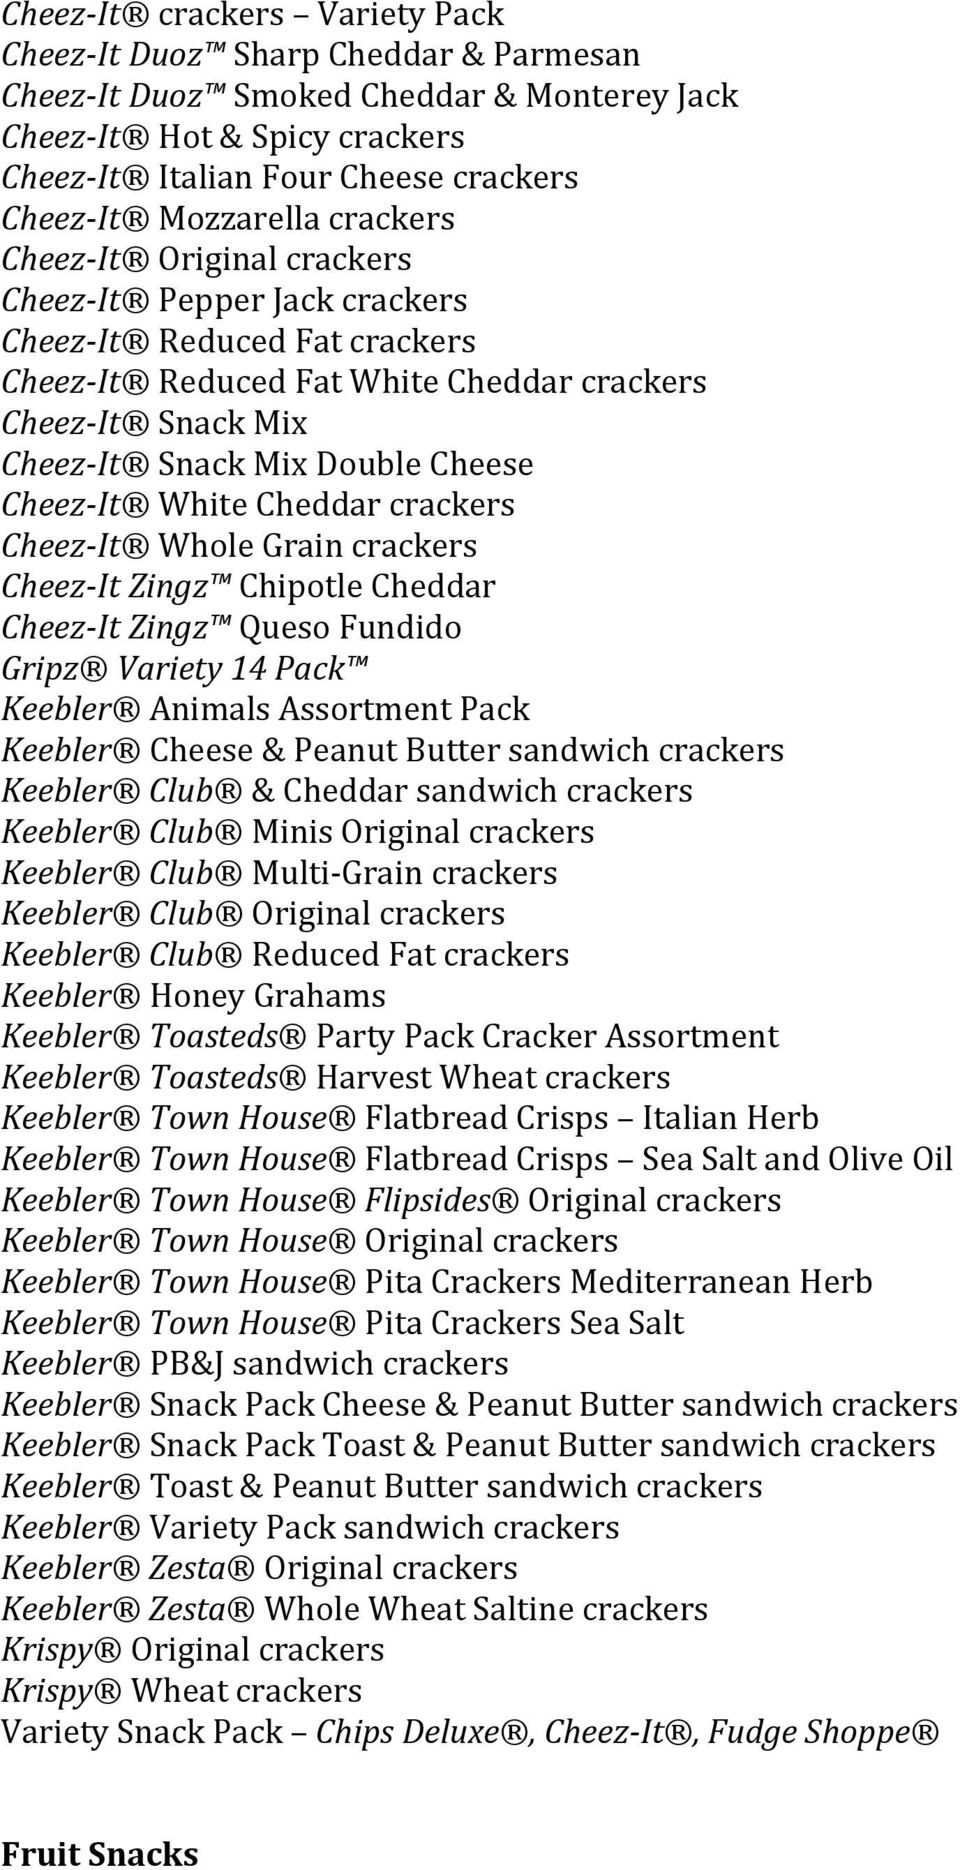 Cheese Cheez-It White Cheddar crackers Cheez-It Whole Grain crackers Cheez-It Zingz Chipotle Cheddar Cheez-It Zingz Queso Fundido Gripz Variety 14 Pack Keebler Animals Assortment Pack Keebler Cheese